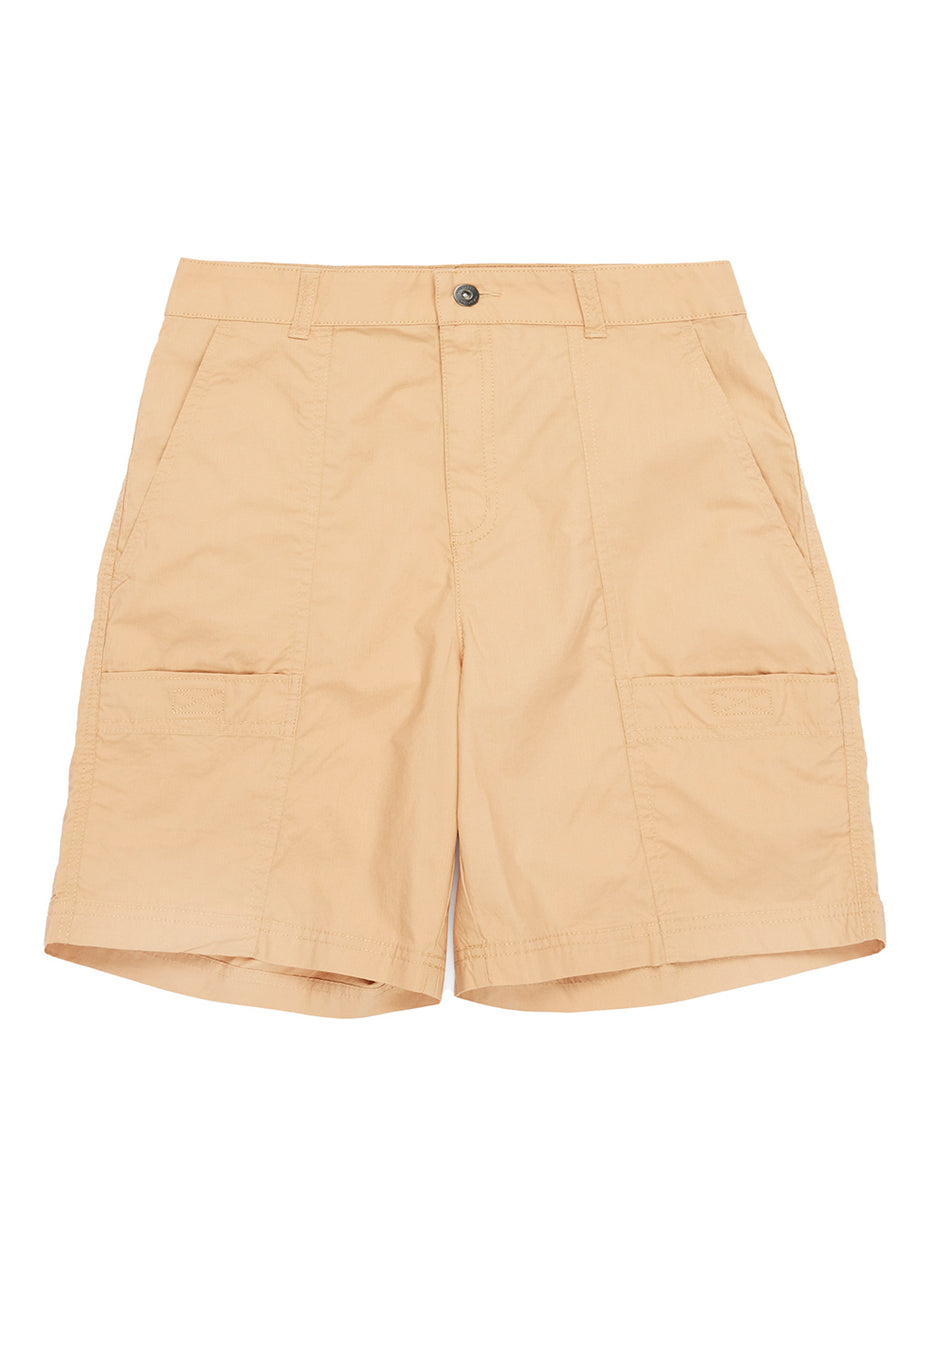 Columbia Women's Holly Hideaway Washed Out Bermuda Shorts - Canoe